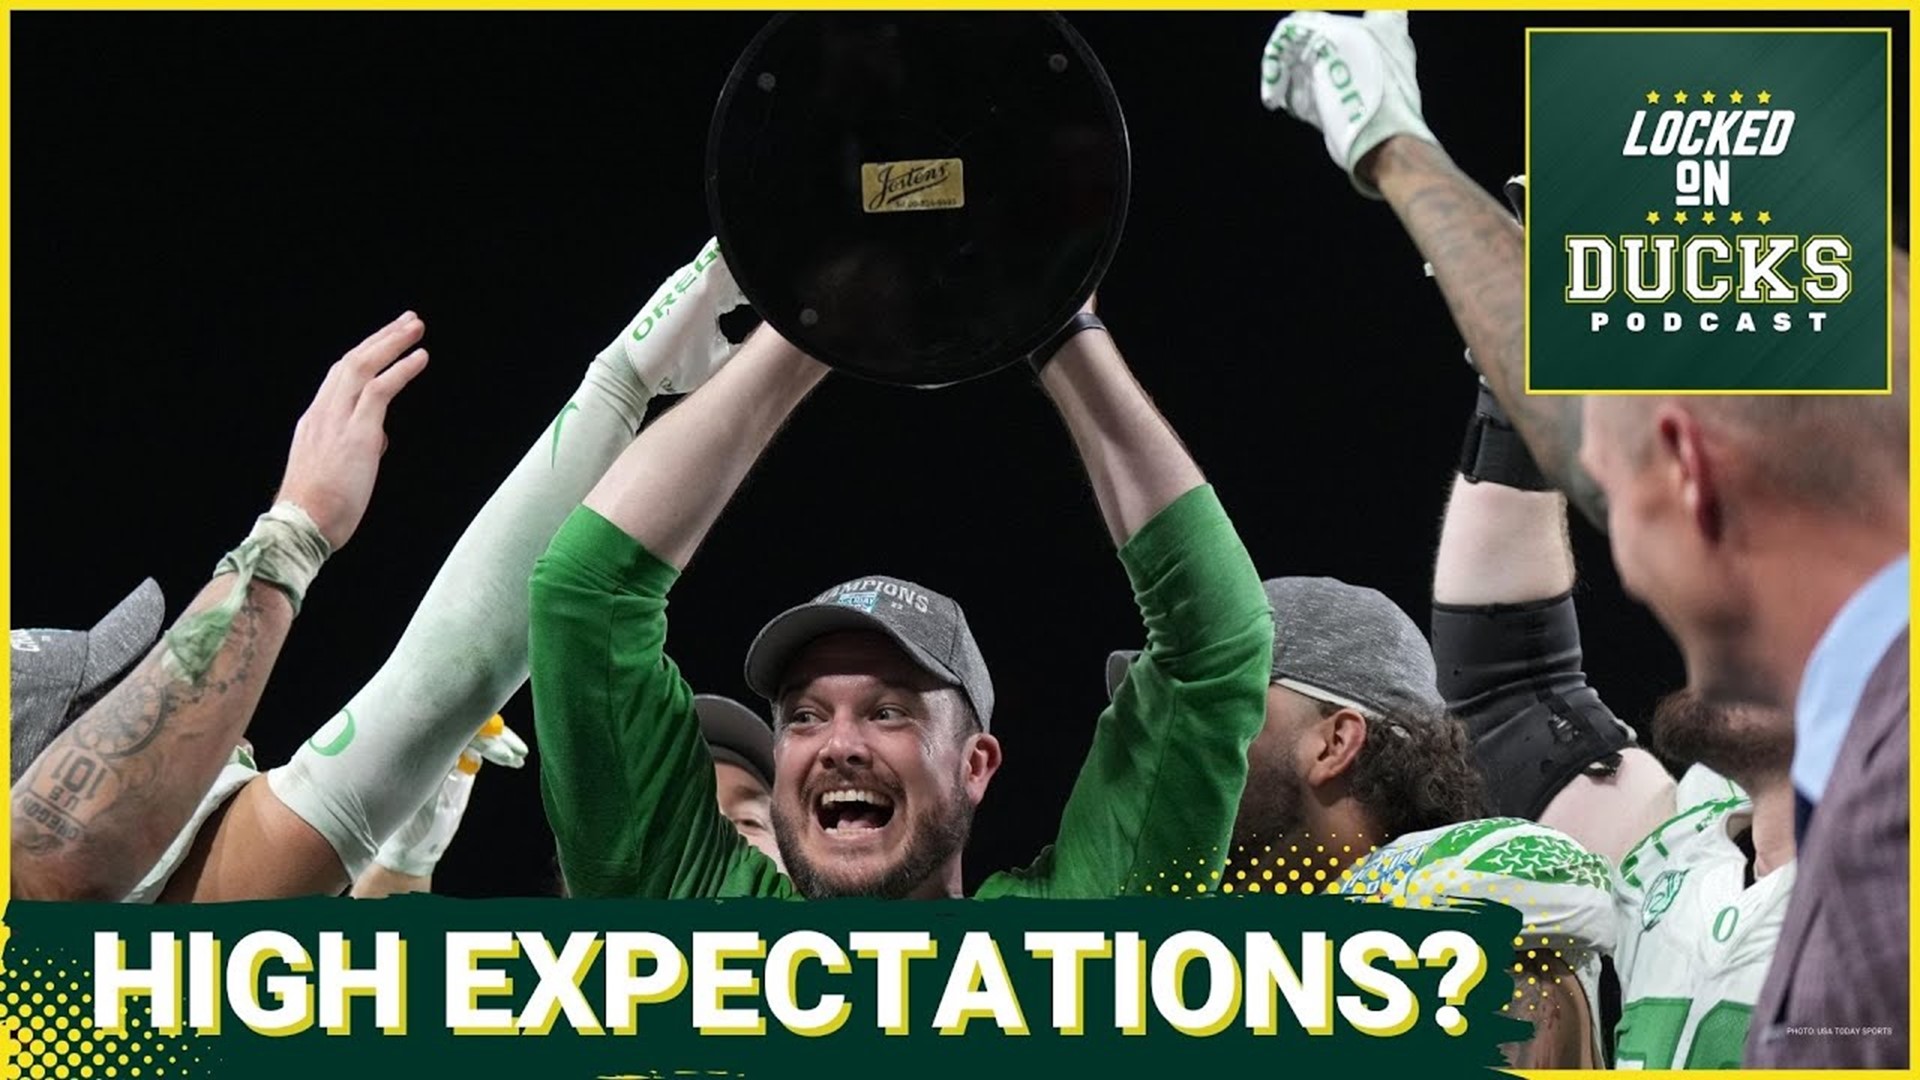 On today's episode of Locked On Ducks, Spencer McLaughlin discusses the big-picture expectations for Dan Lanning's second year at the helm.